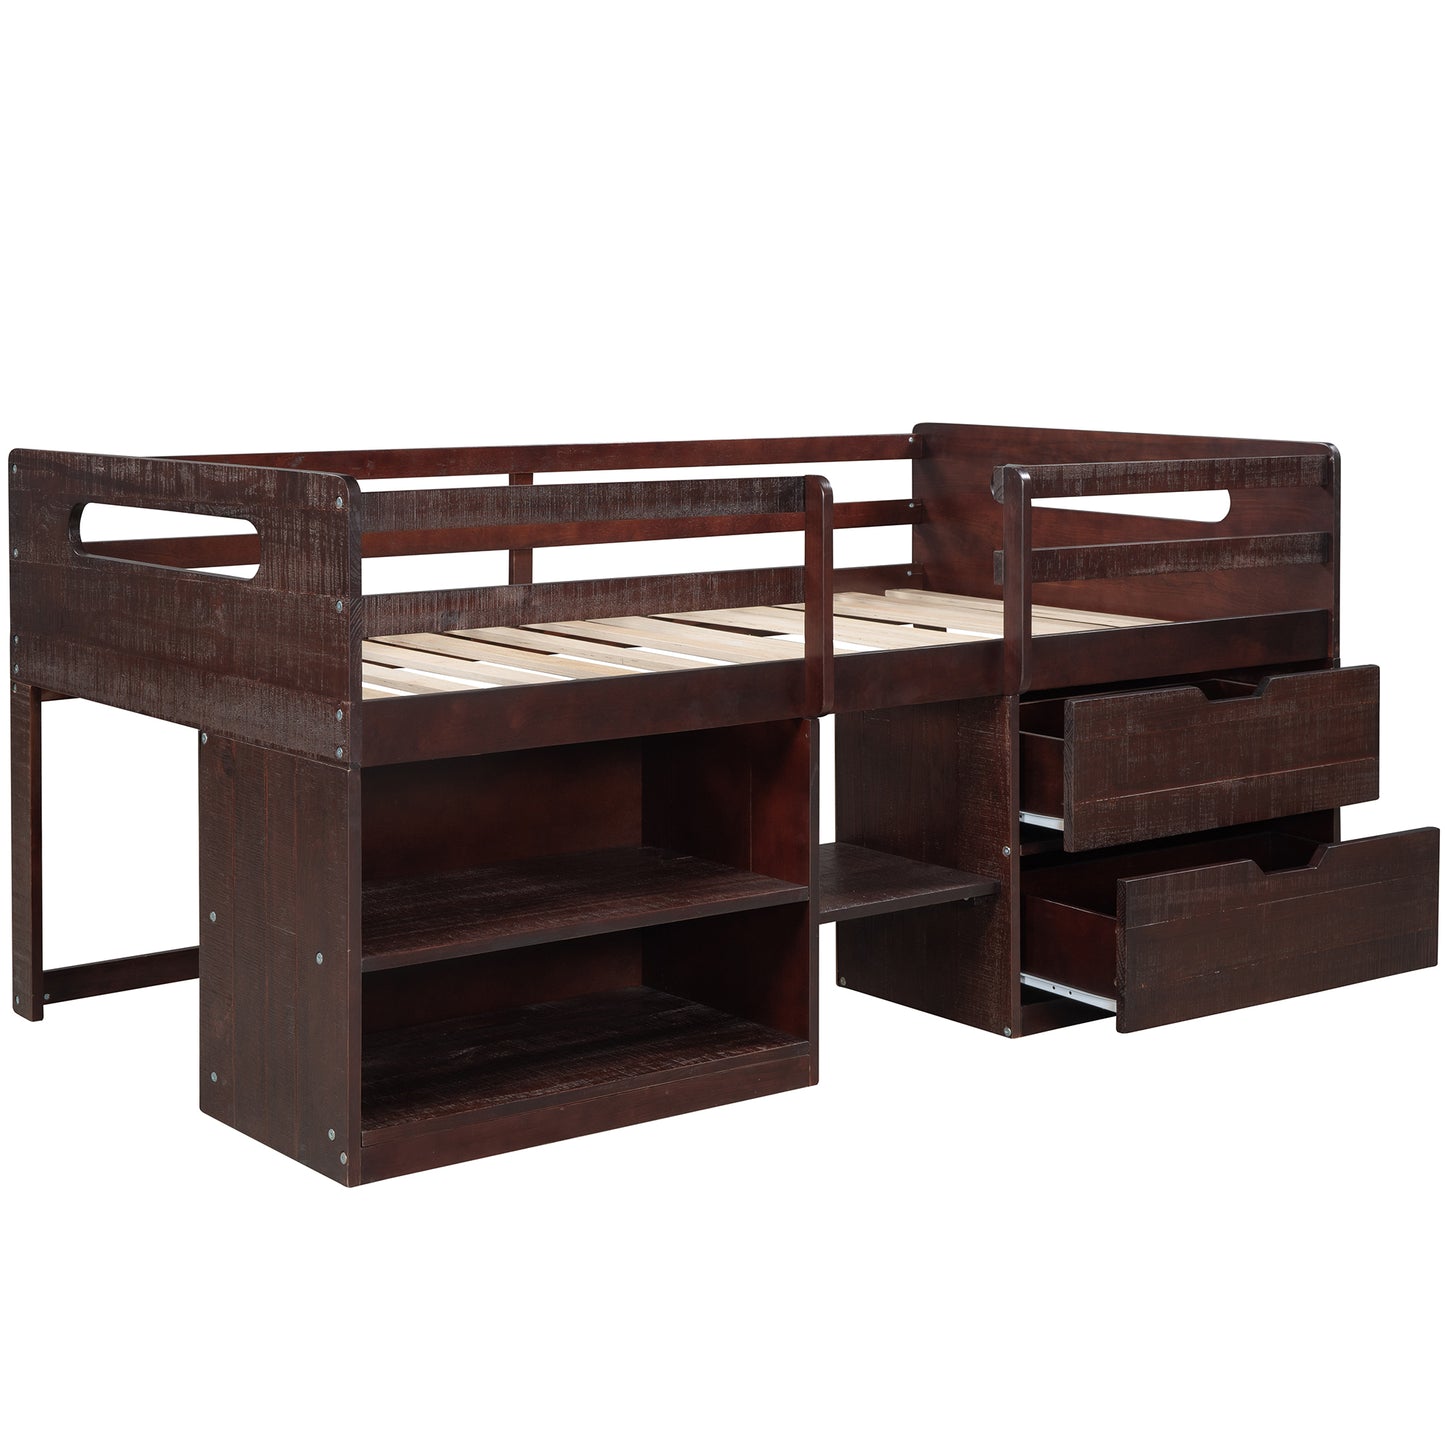 Twin size Loft Bed with Two Shelves and Two drawers (Antique Espresso)